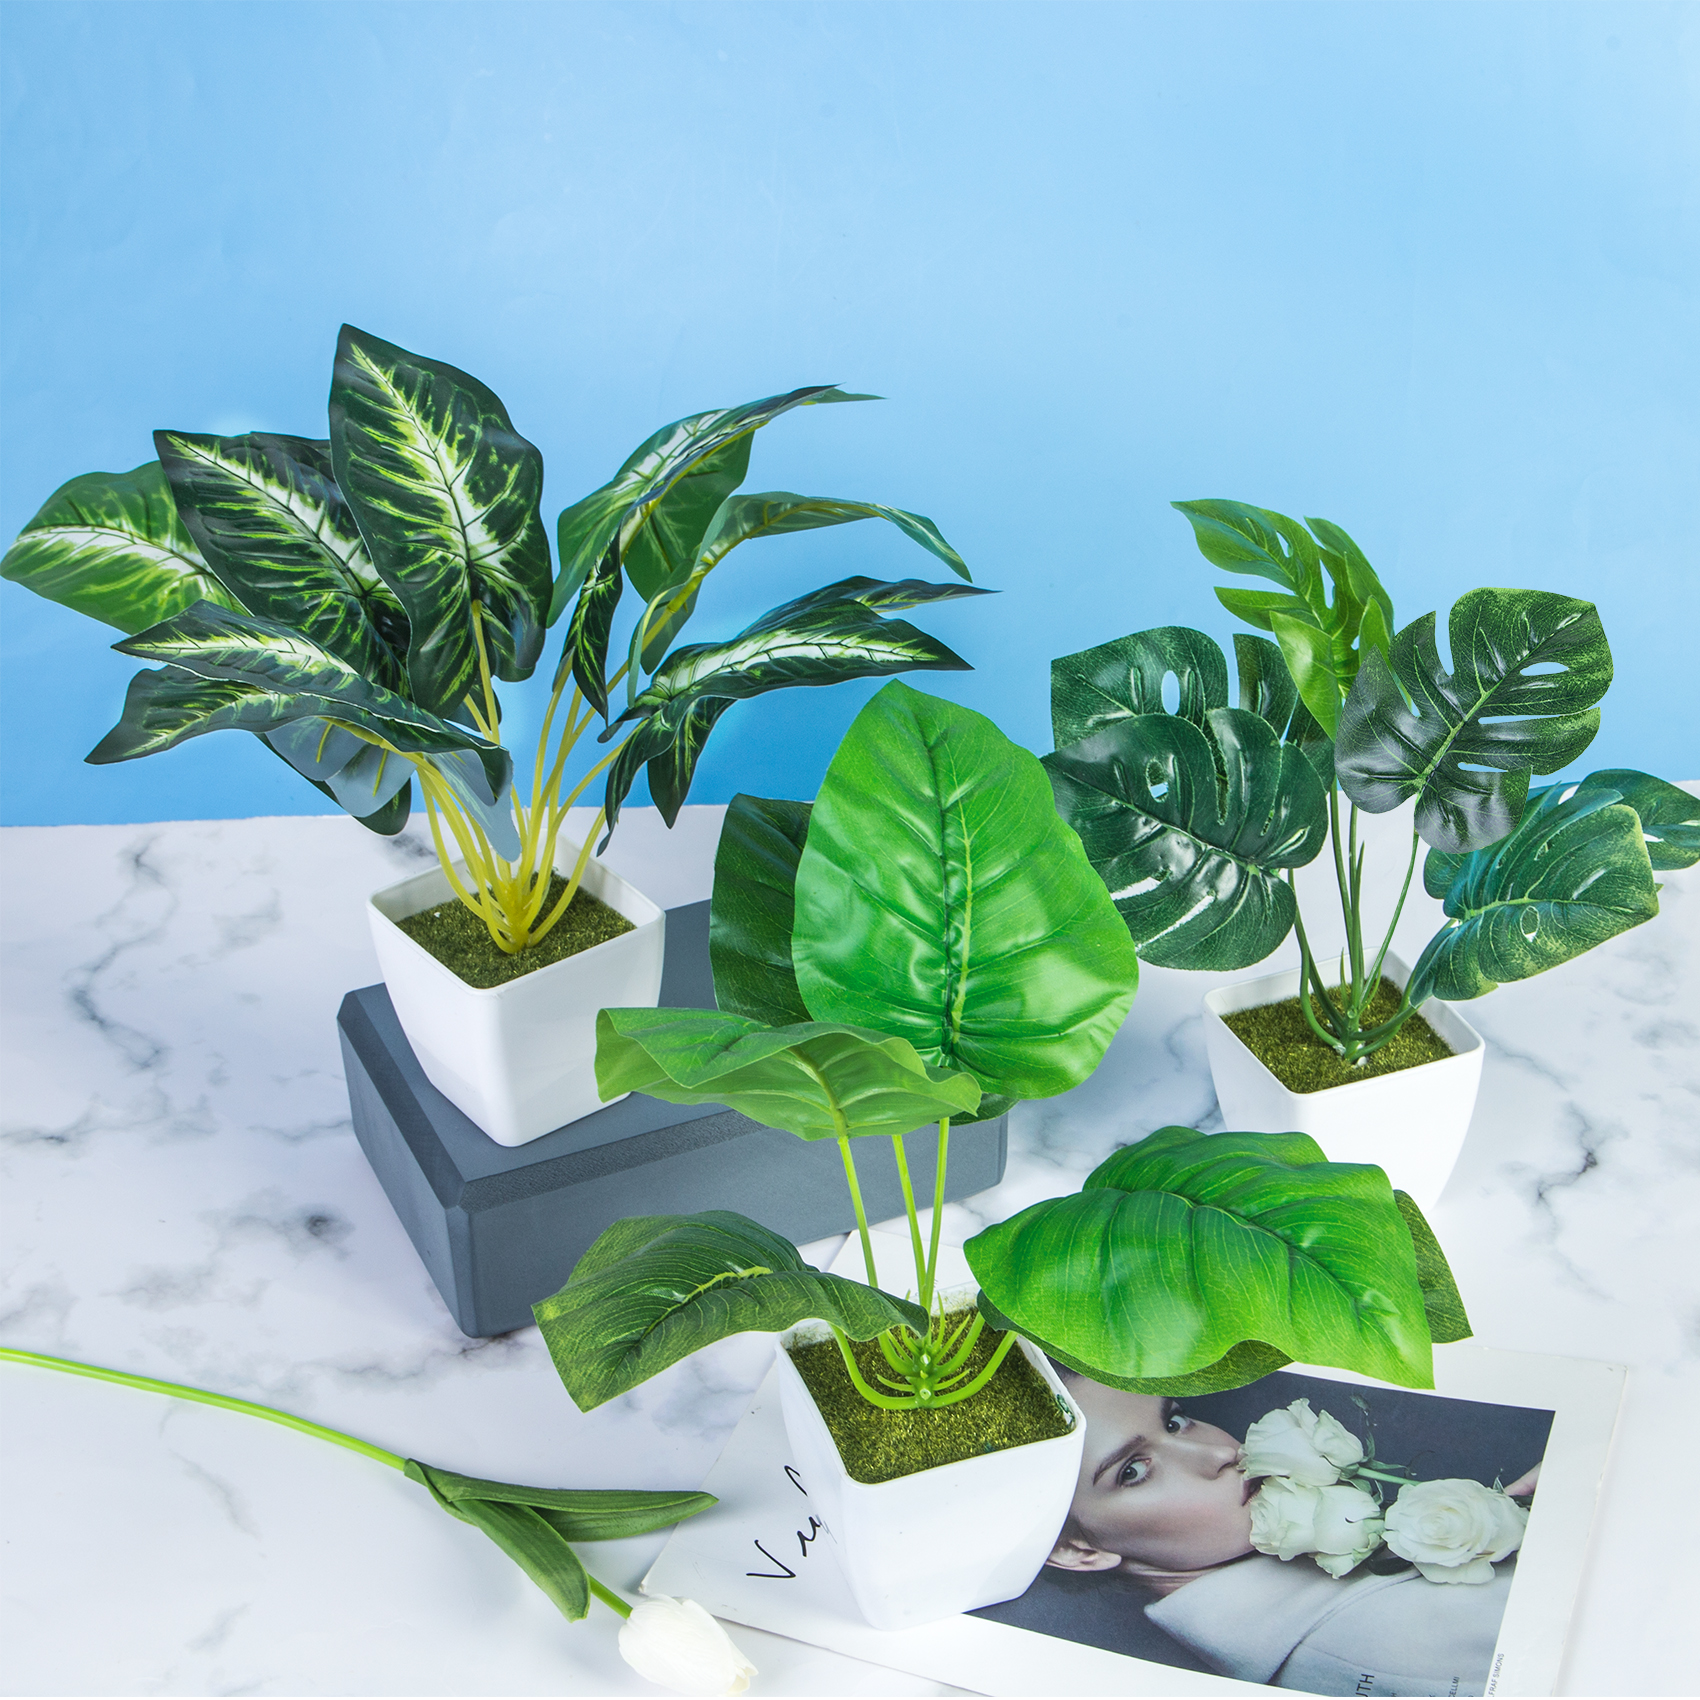 Ouddy Decor 3 Pack Small Fake Plants Artificial Mini Potted Plants Faux Greenery Tabletop Artificial Plants for Desk Shelf Bathroom Office Home Indoor Decor